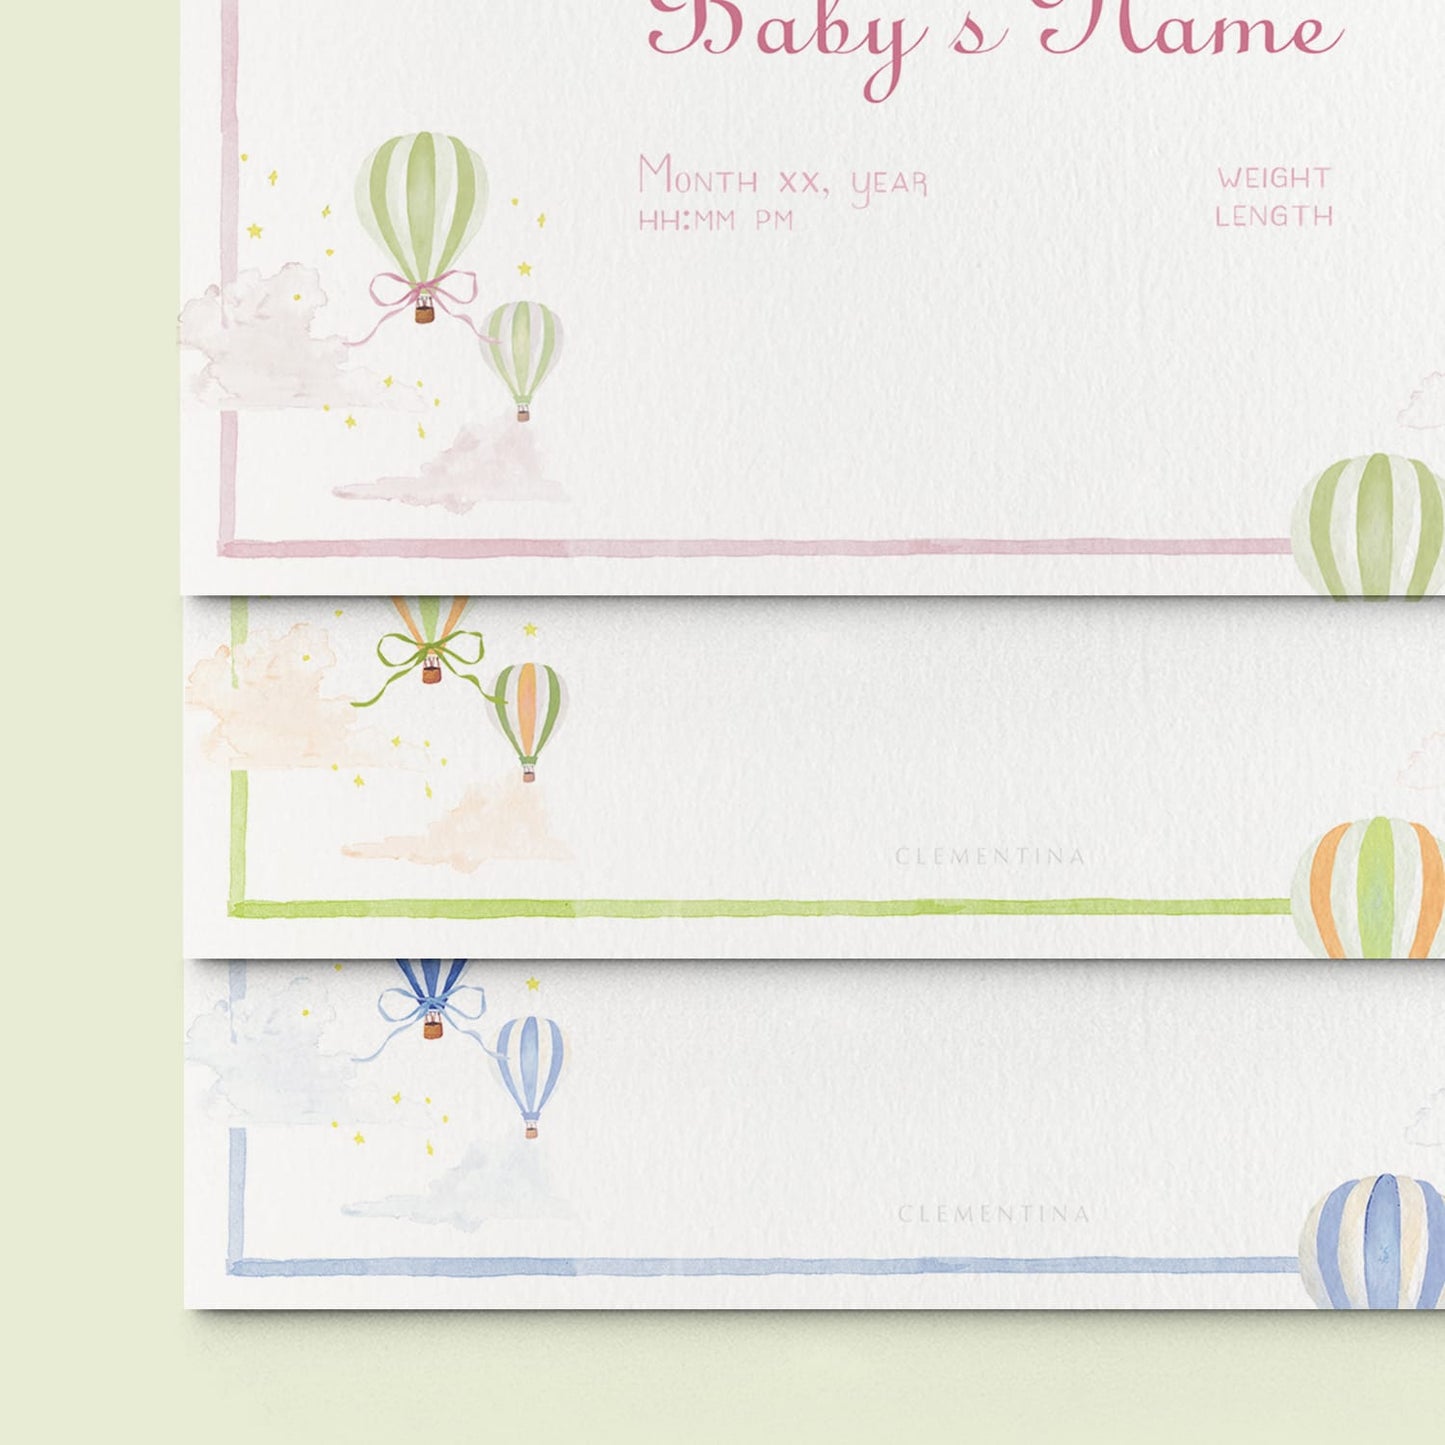 Hot Air Balloons Printed Birth Announcements - Without Photo - 02